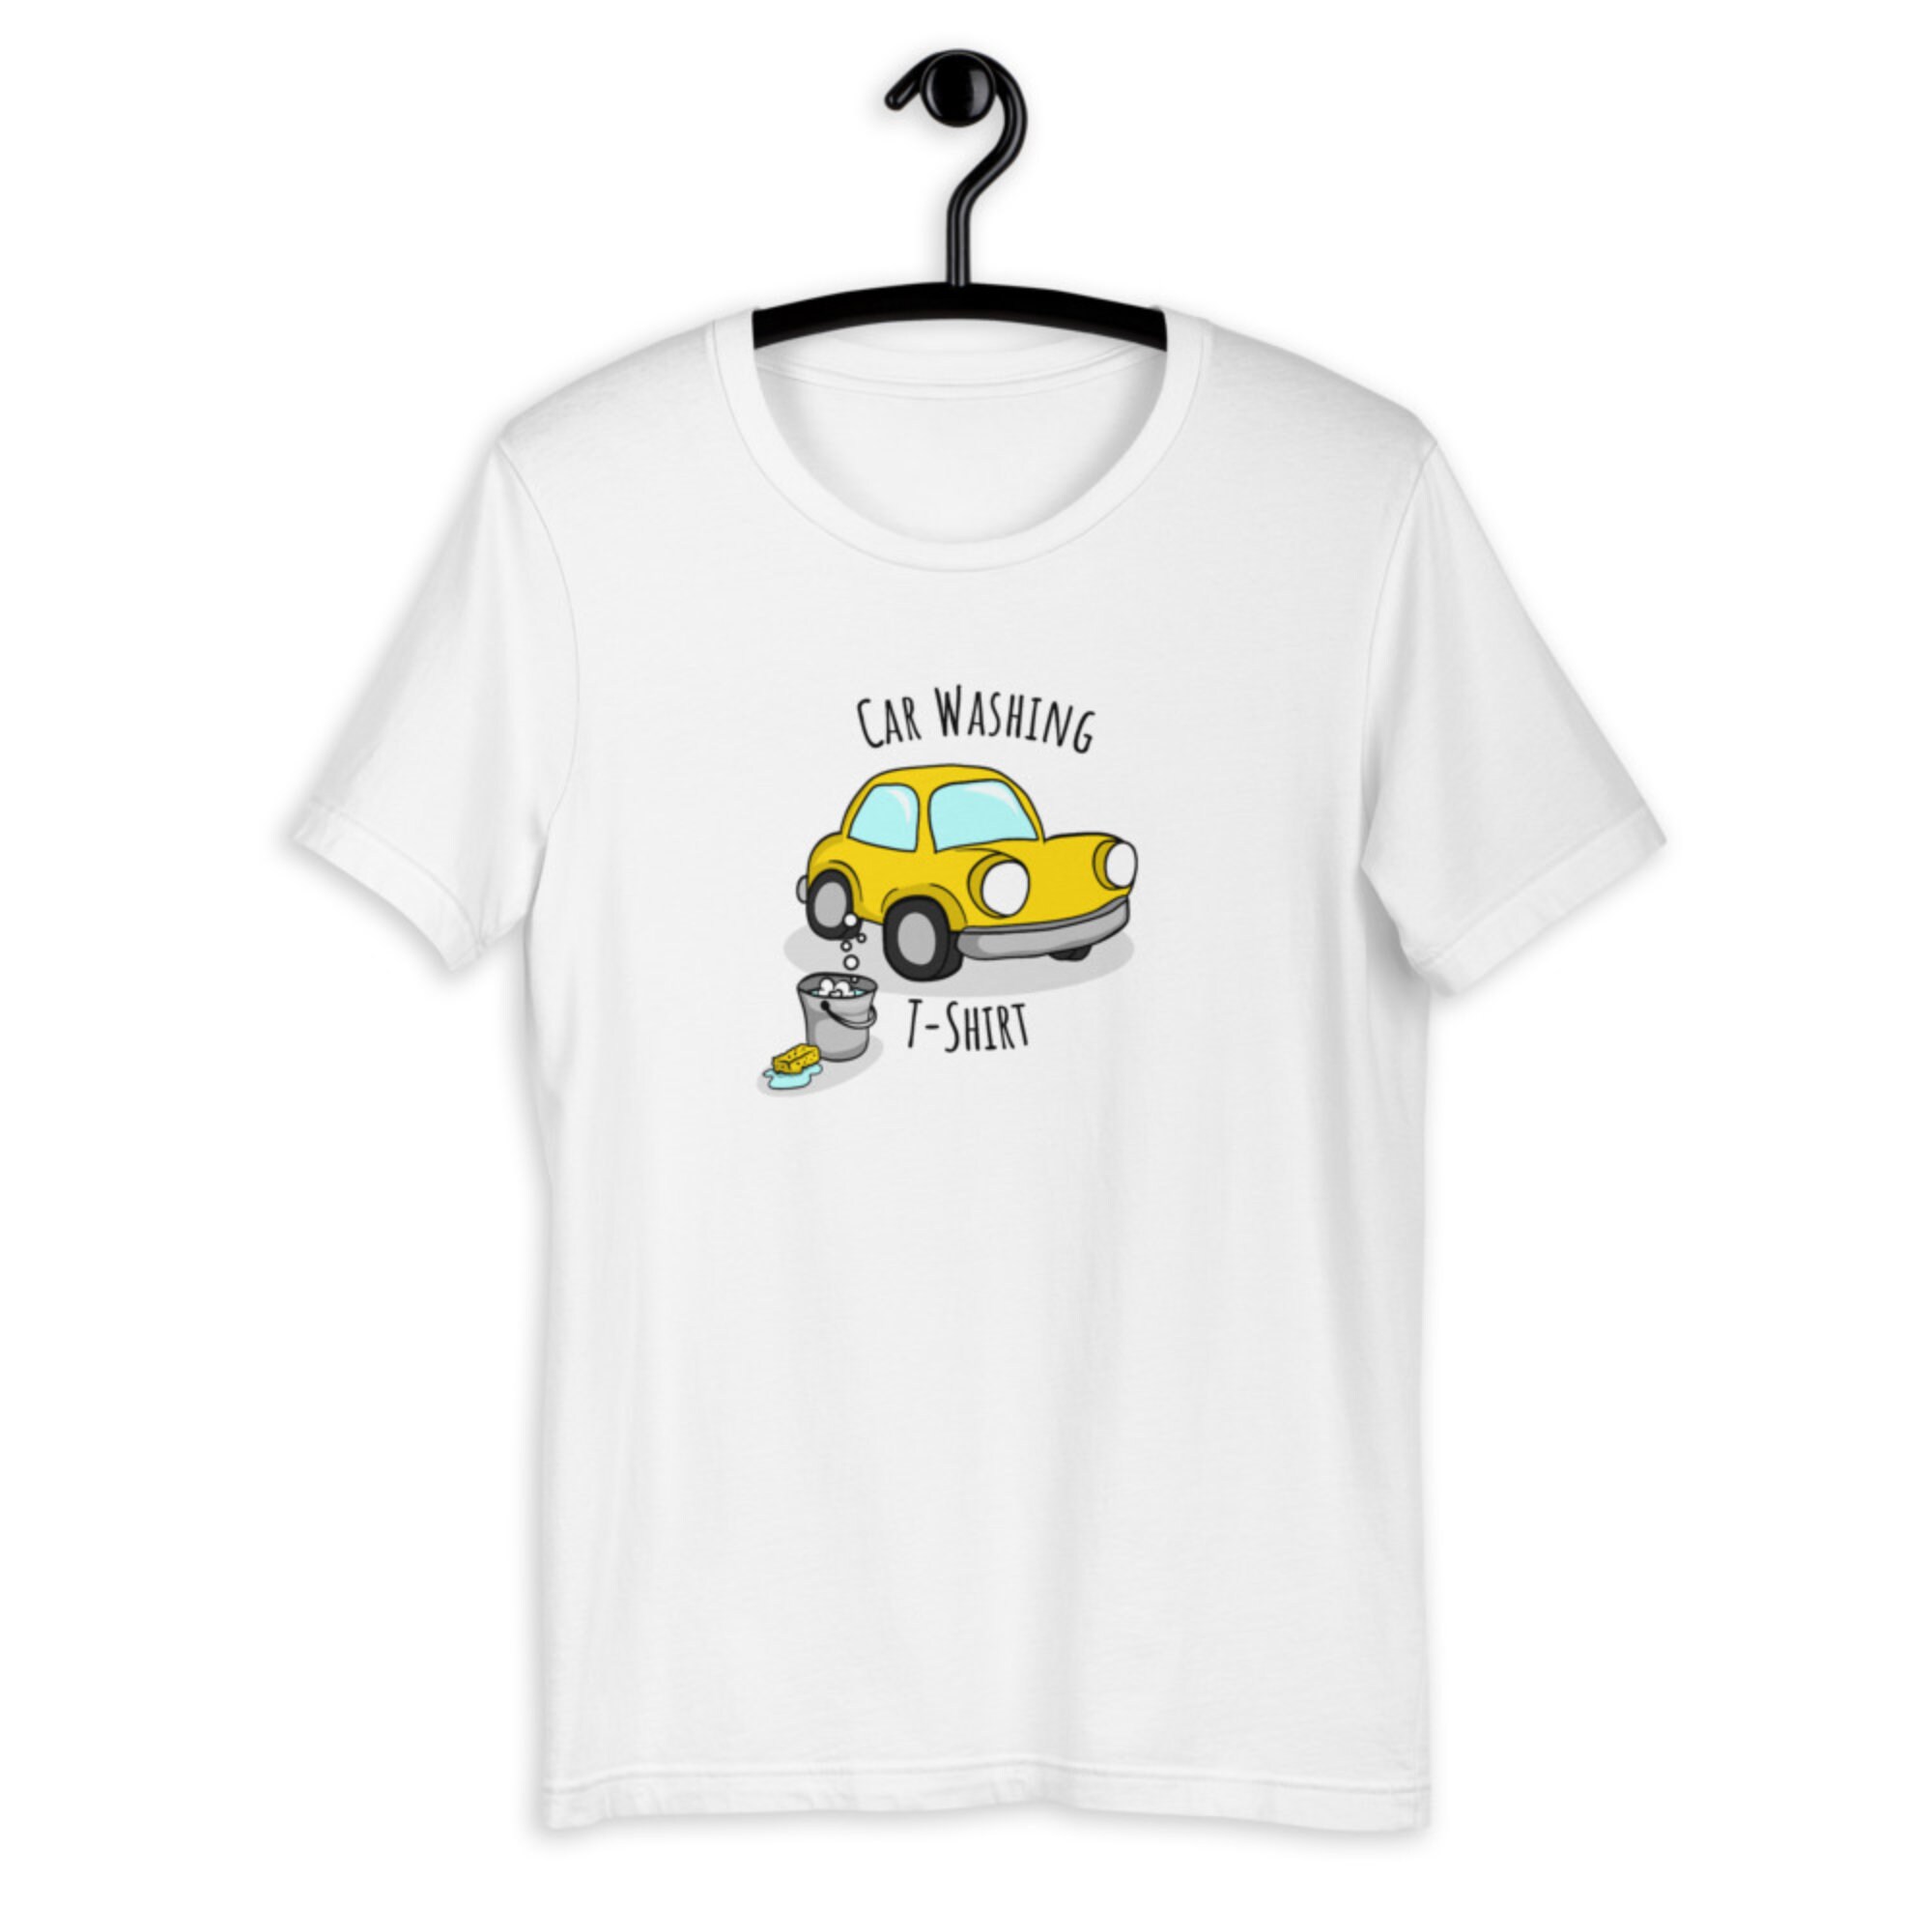 Washing White T-shirt. A Funny T-shirt for When Your -